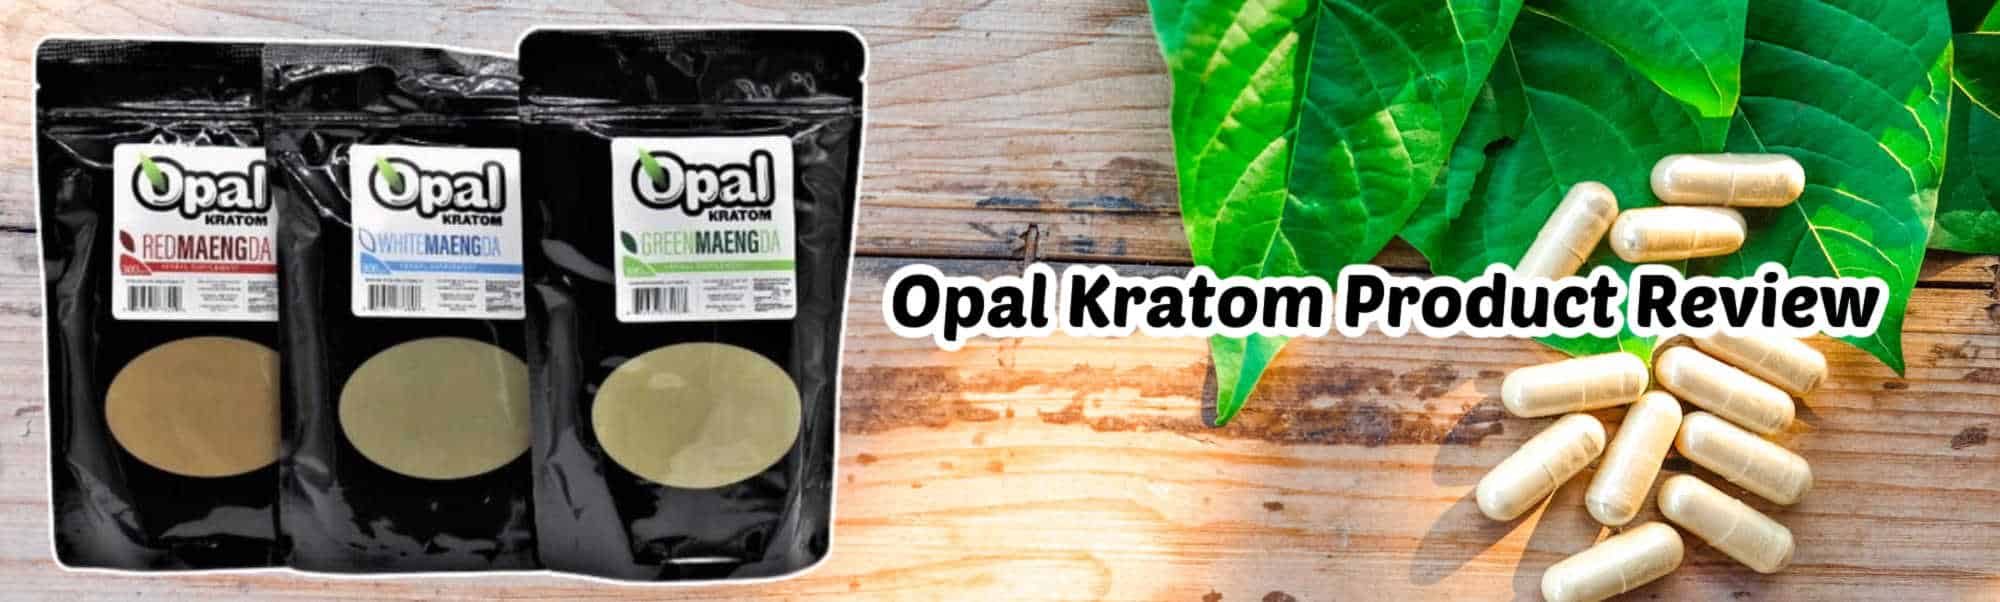 image of opal kratom product review